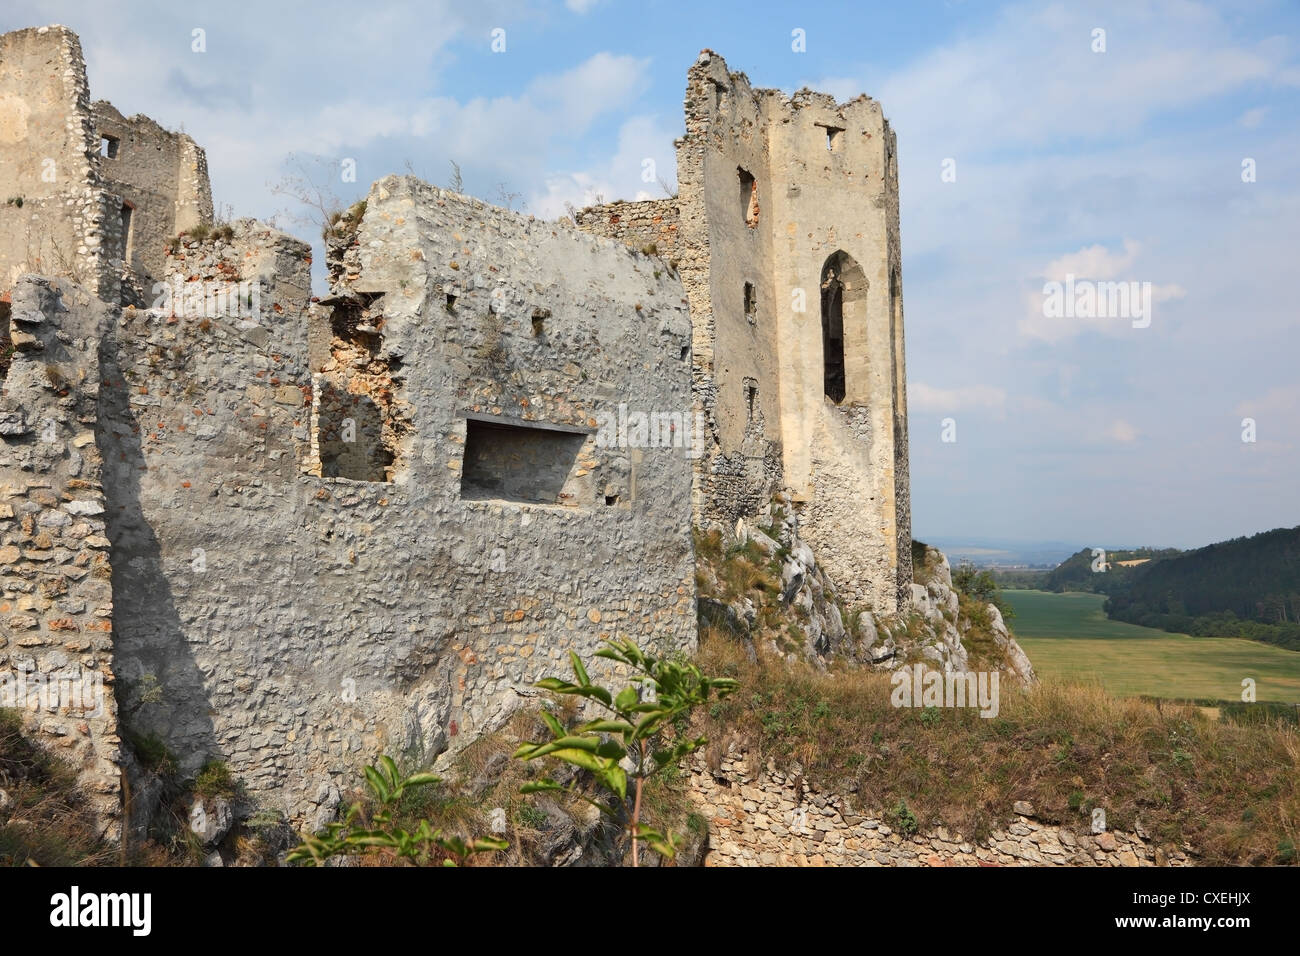 Dilapidated medieval fortress Stock Photo